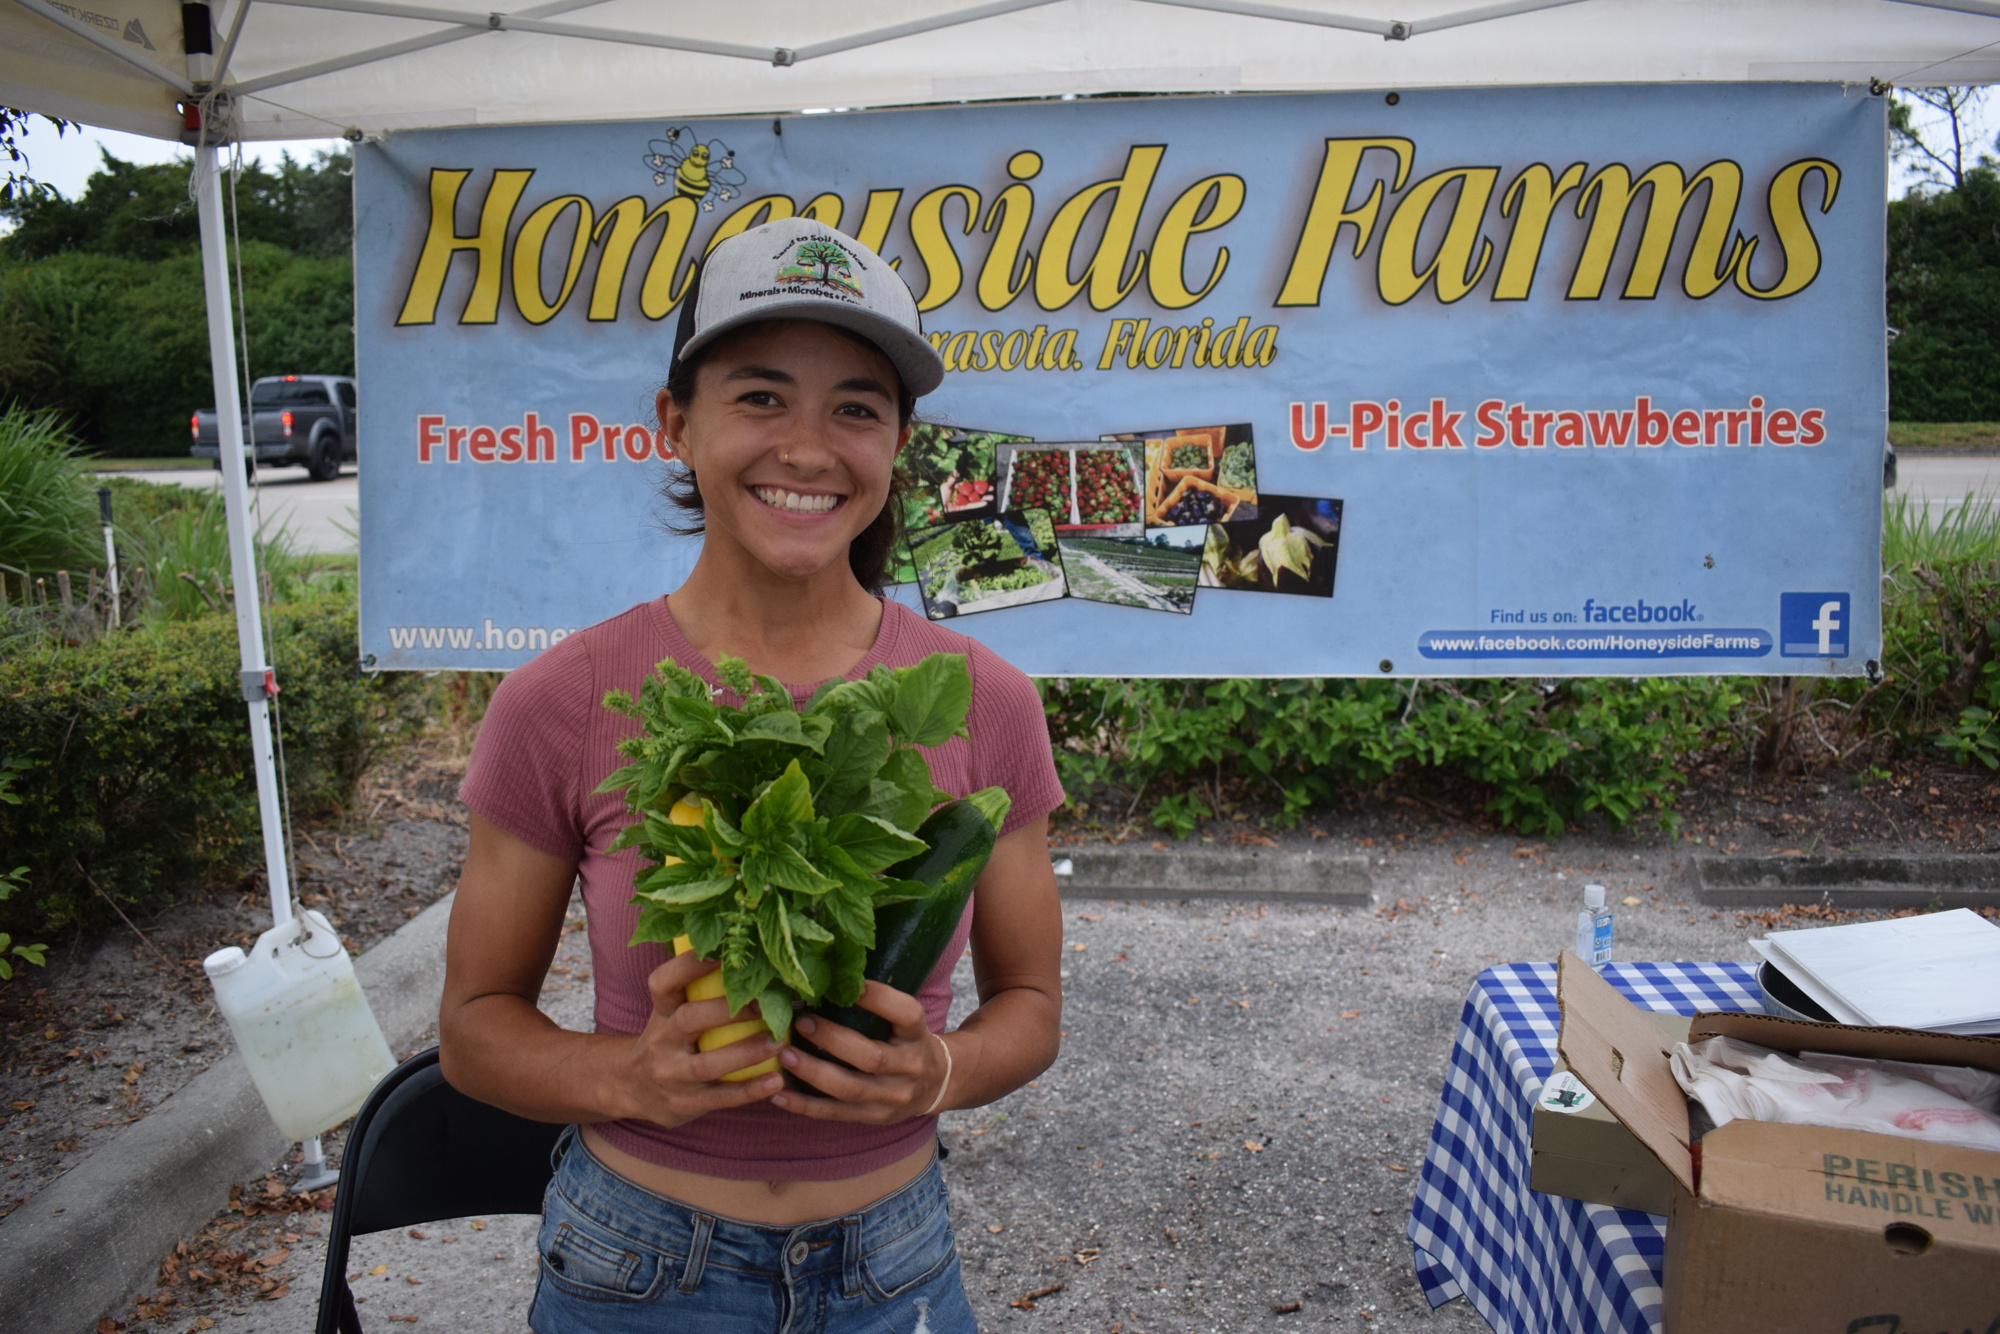 Ida VanDamme, the farm manager of Honeyside Farms of Parrish, will be offering organic produce.